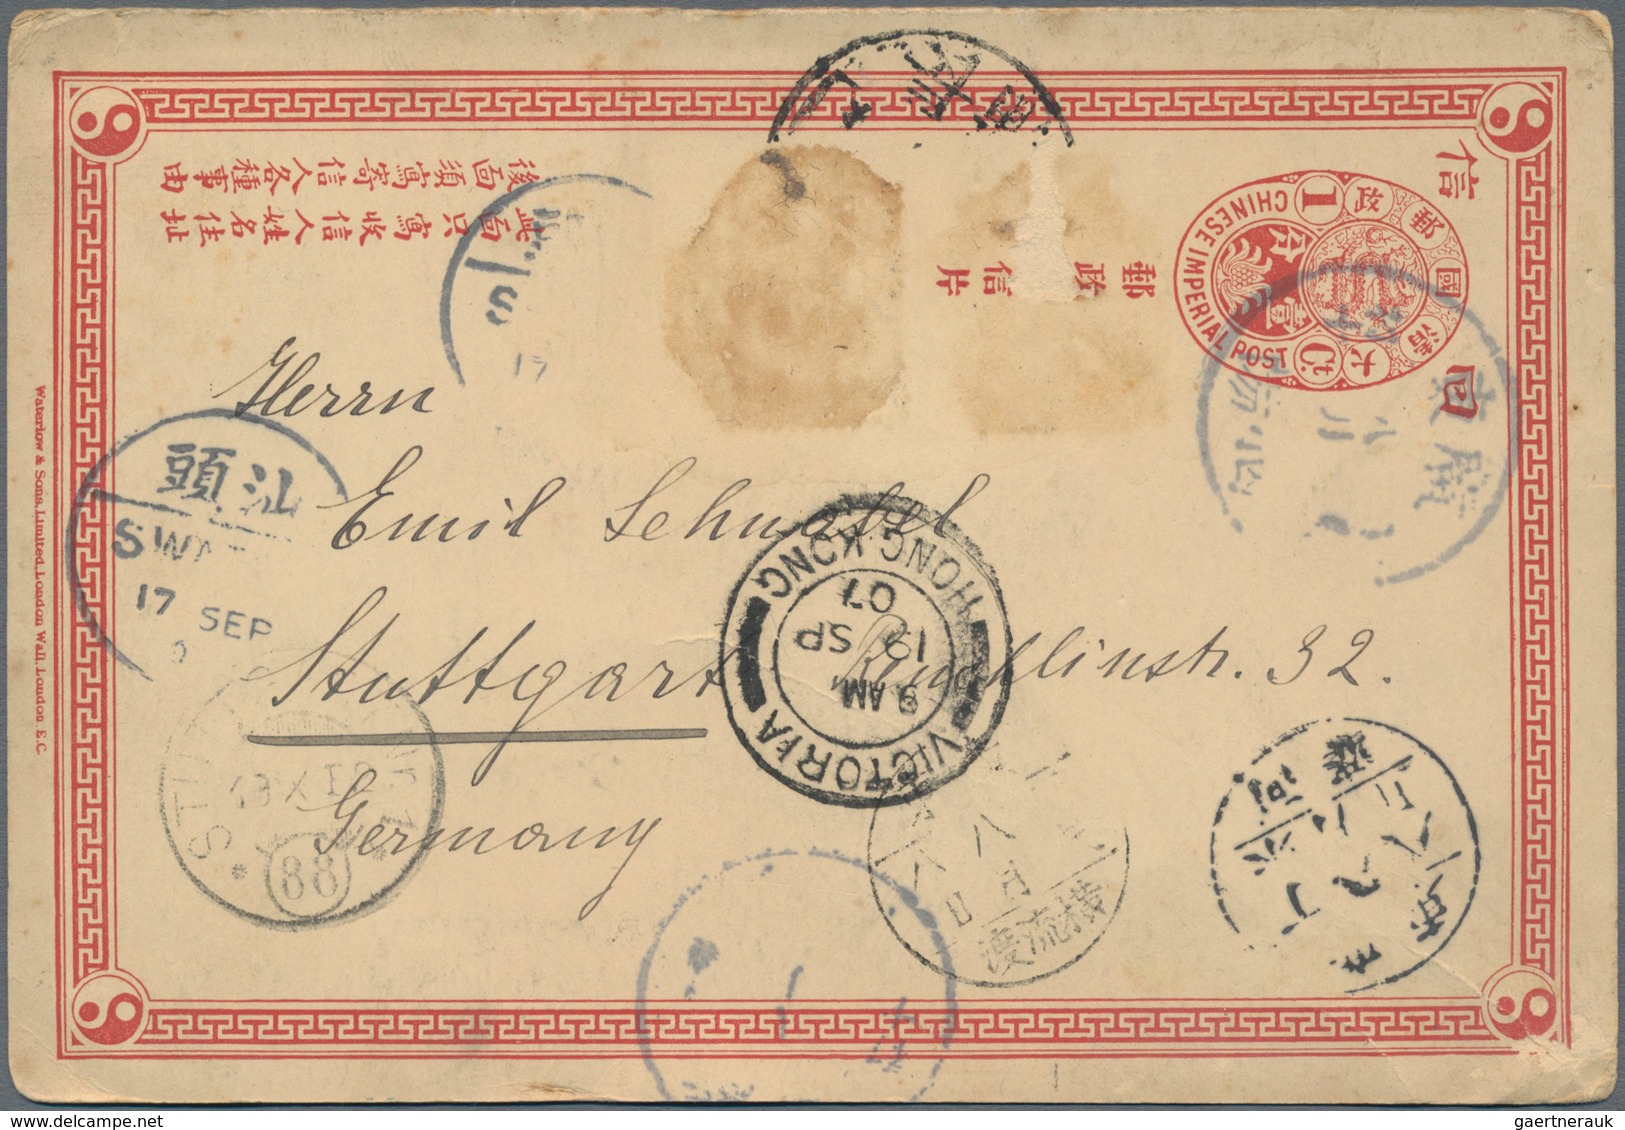 China: 1908, coiling dragon 10 C. ultra canc. boxed dater "Kwangtung Chonglok 1.7.19" to cover to Ge